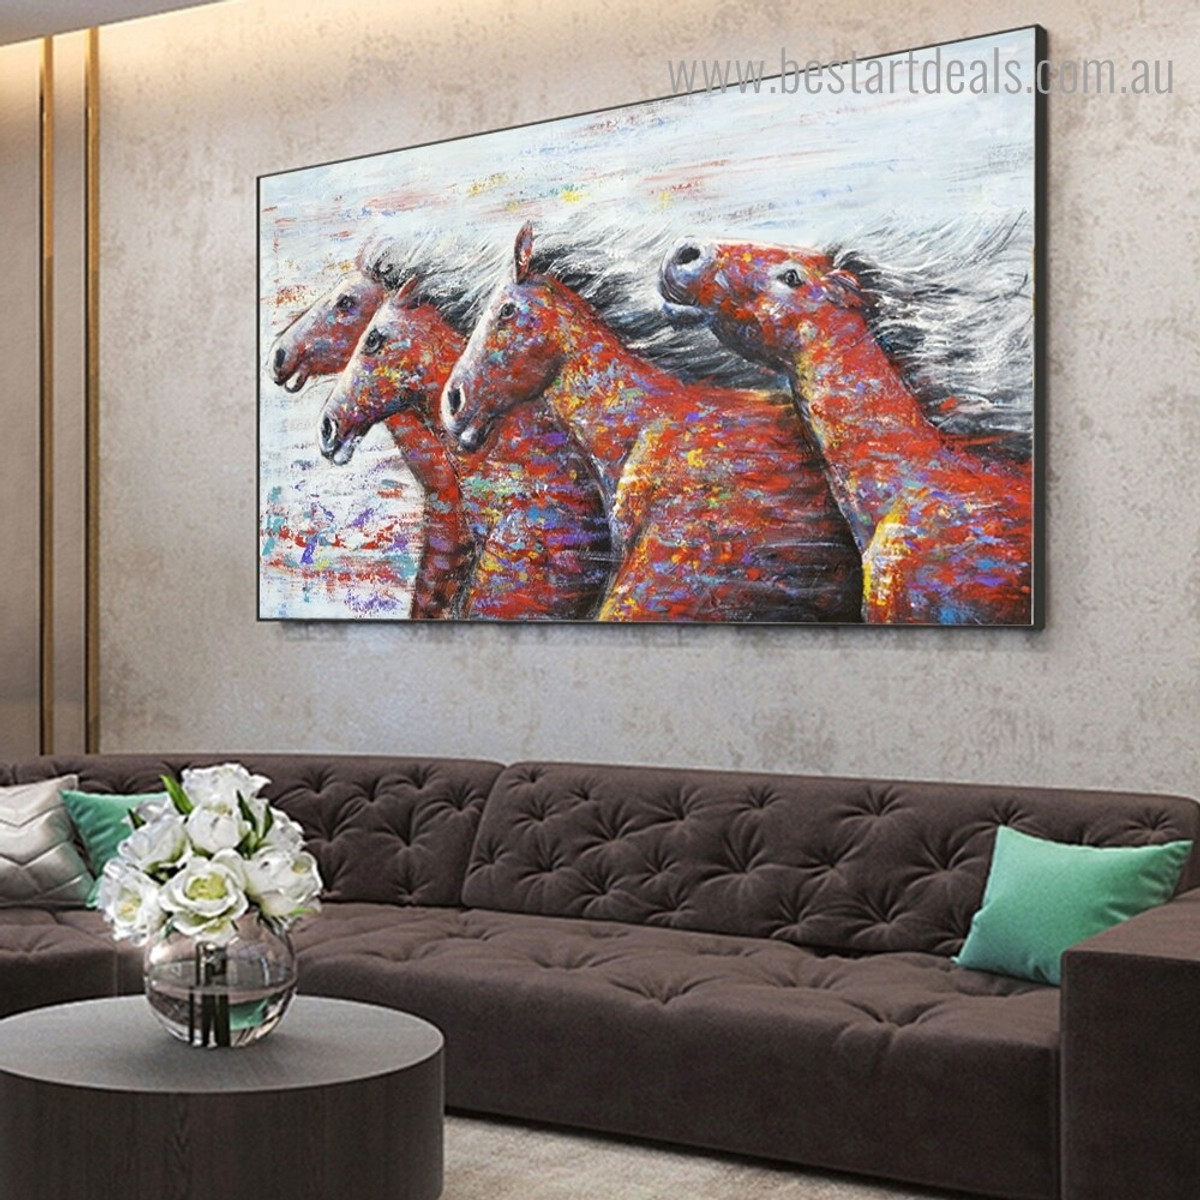 Dapple Running Horses Abstract Animal Framed Portraiture Photo Canvas Print for Room Wall Onlay